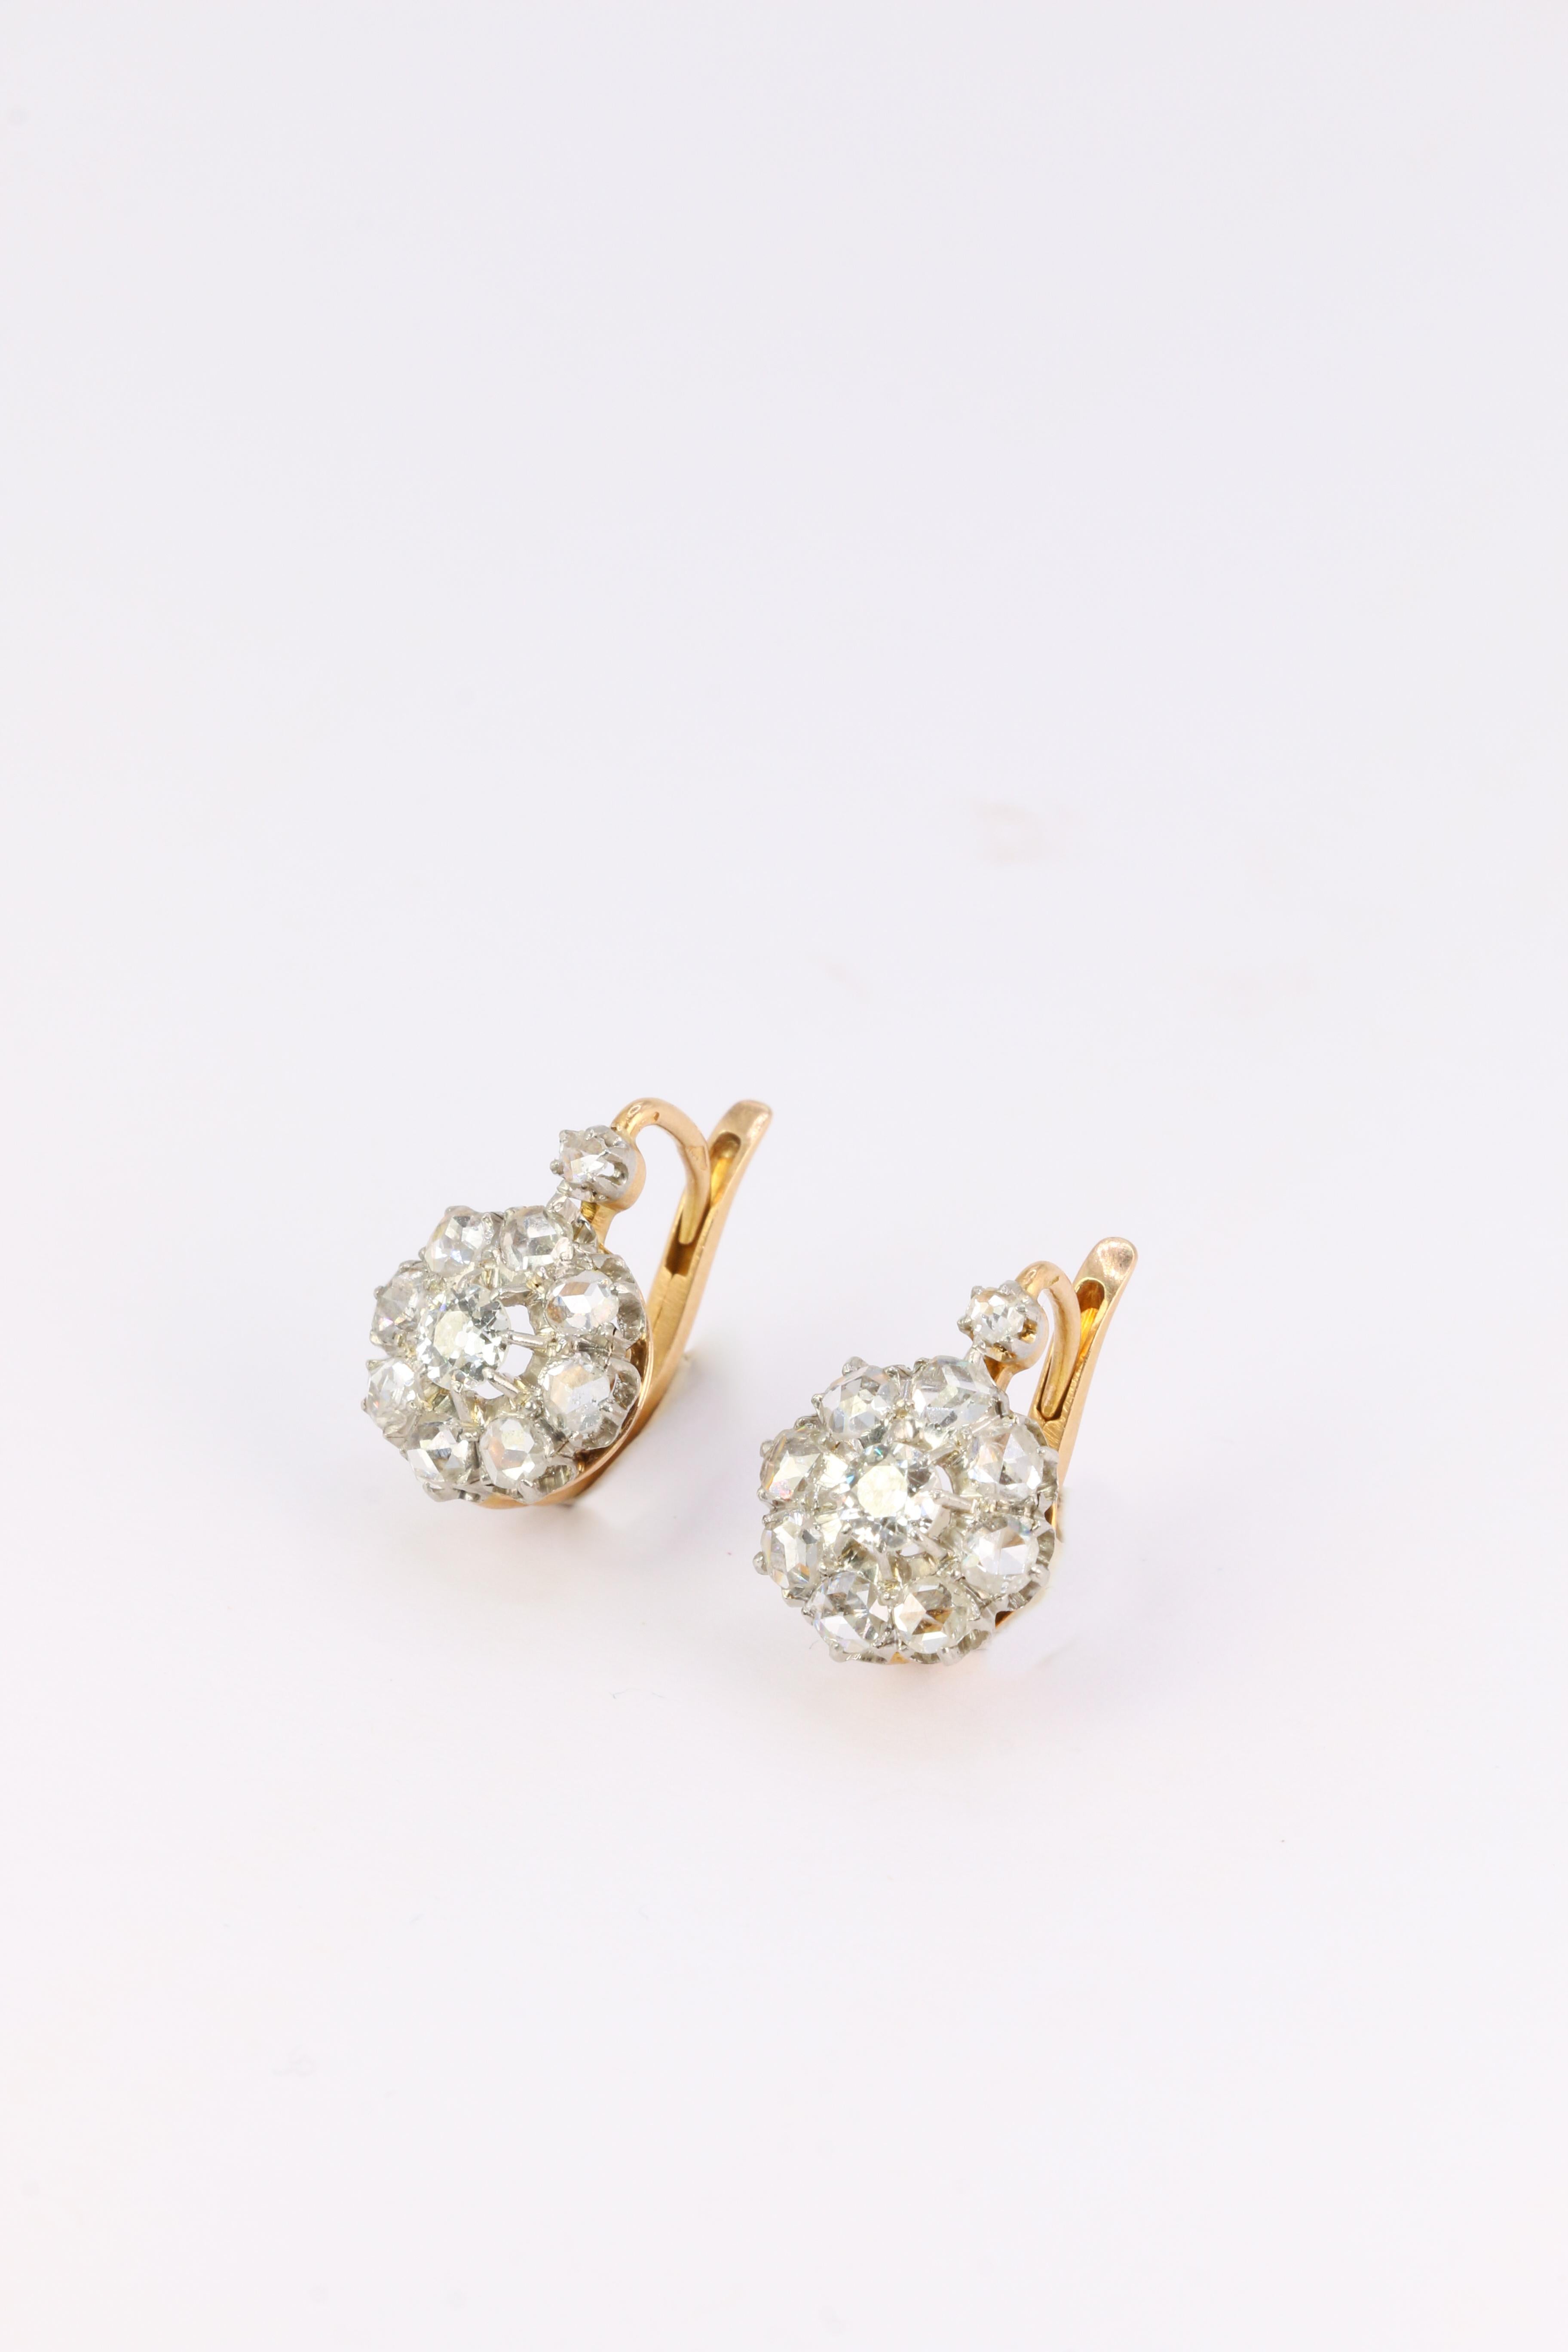 Old Mine Cut Antique gold and silver earrings set with old mine cut diamonds